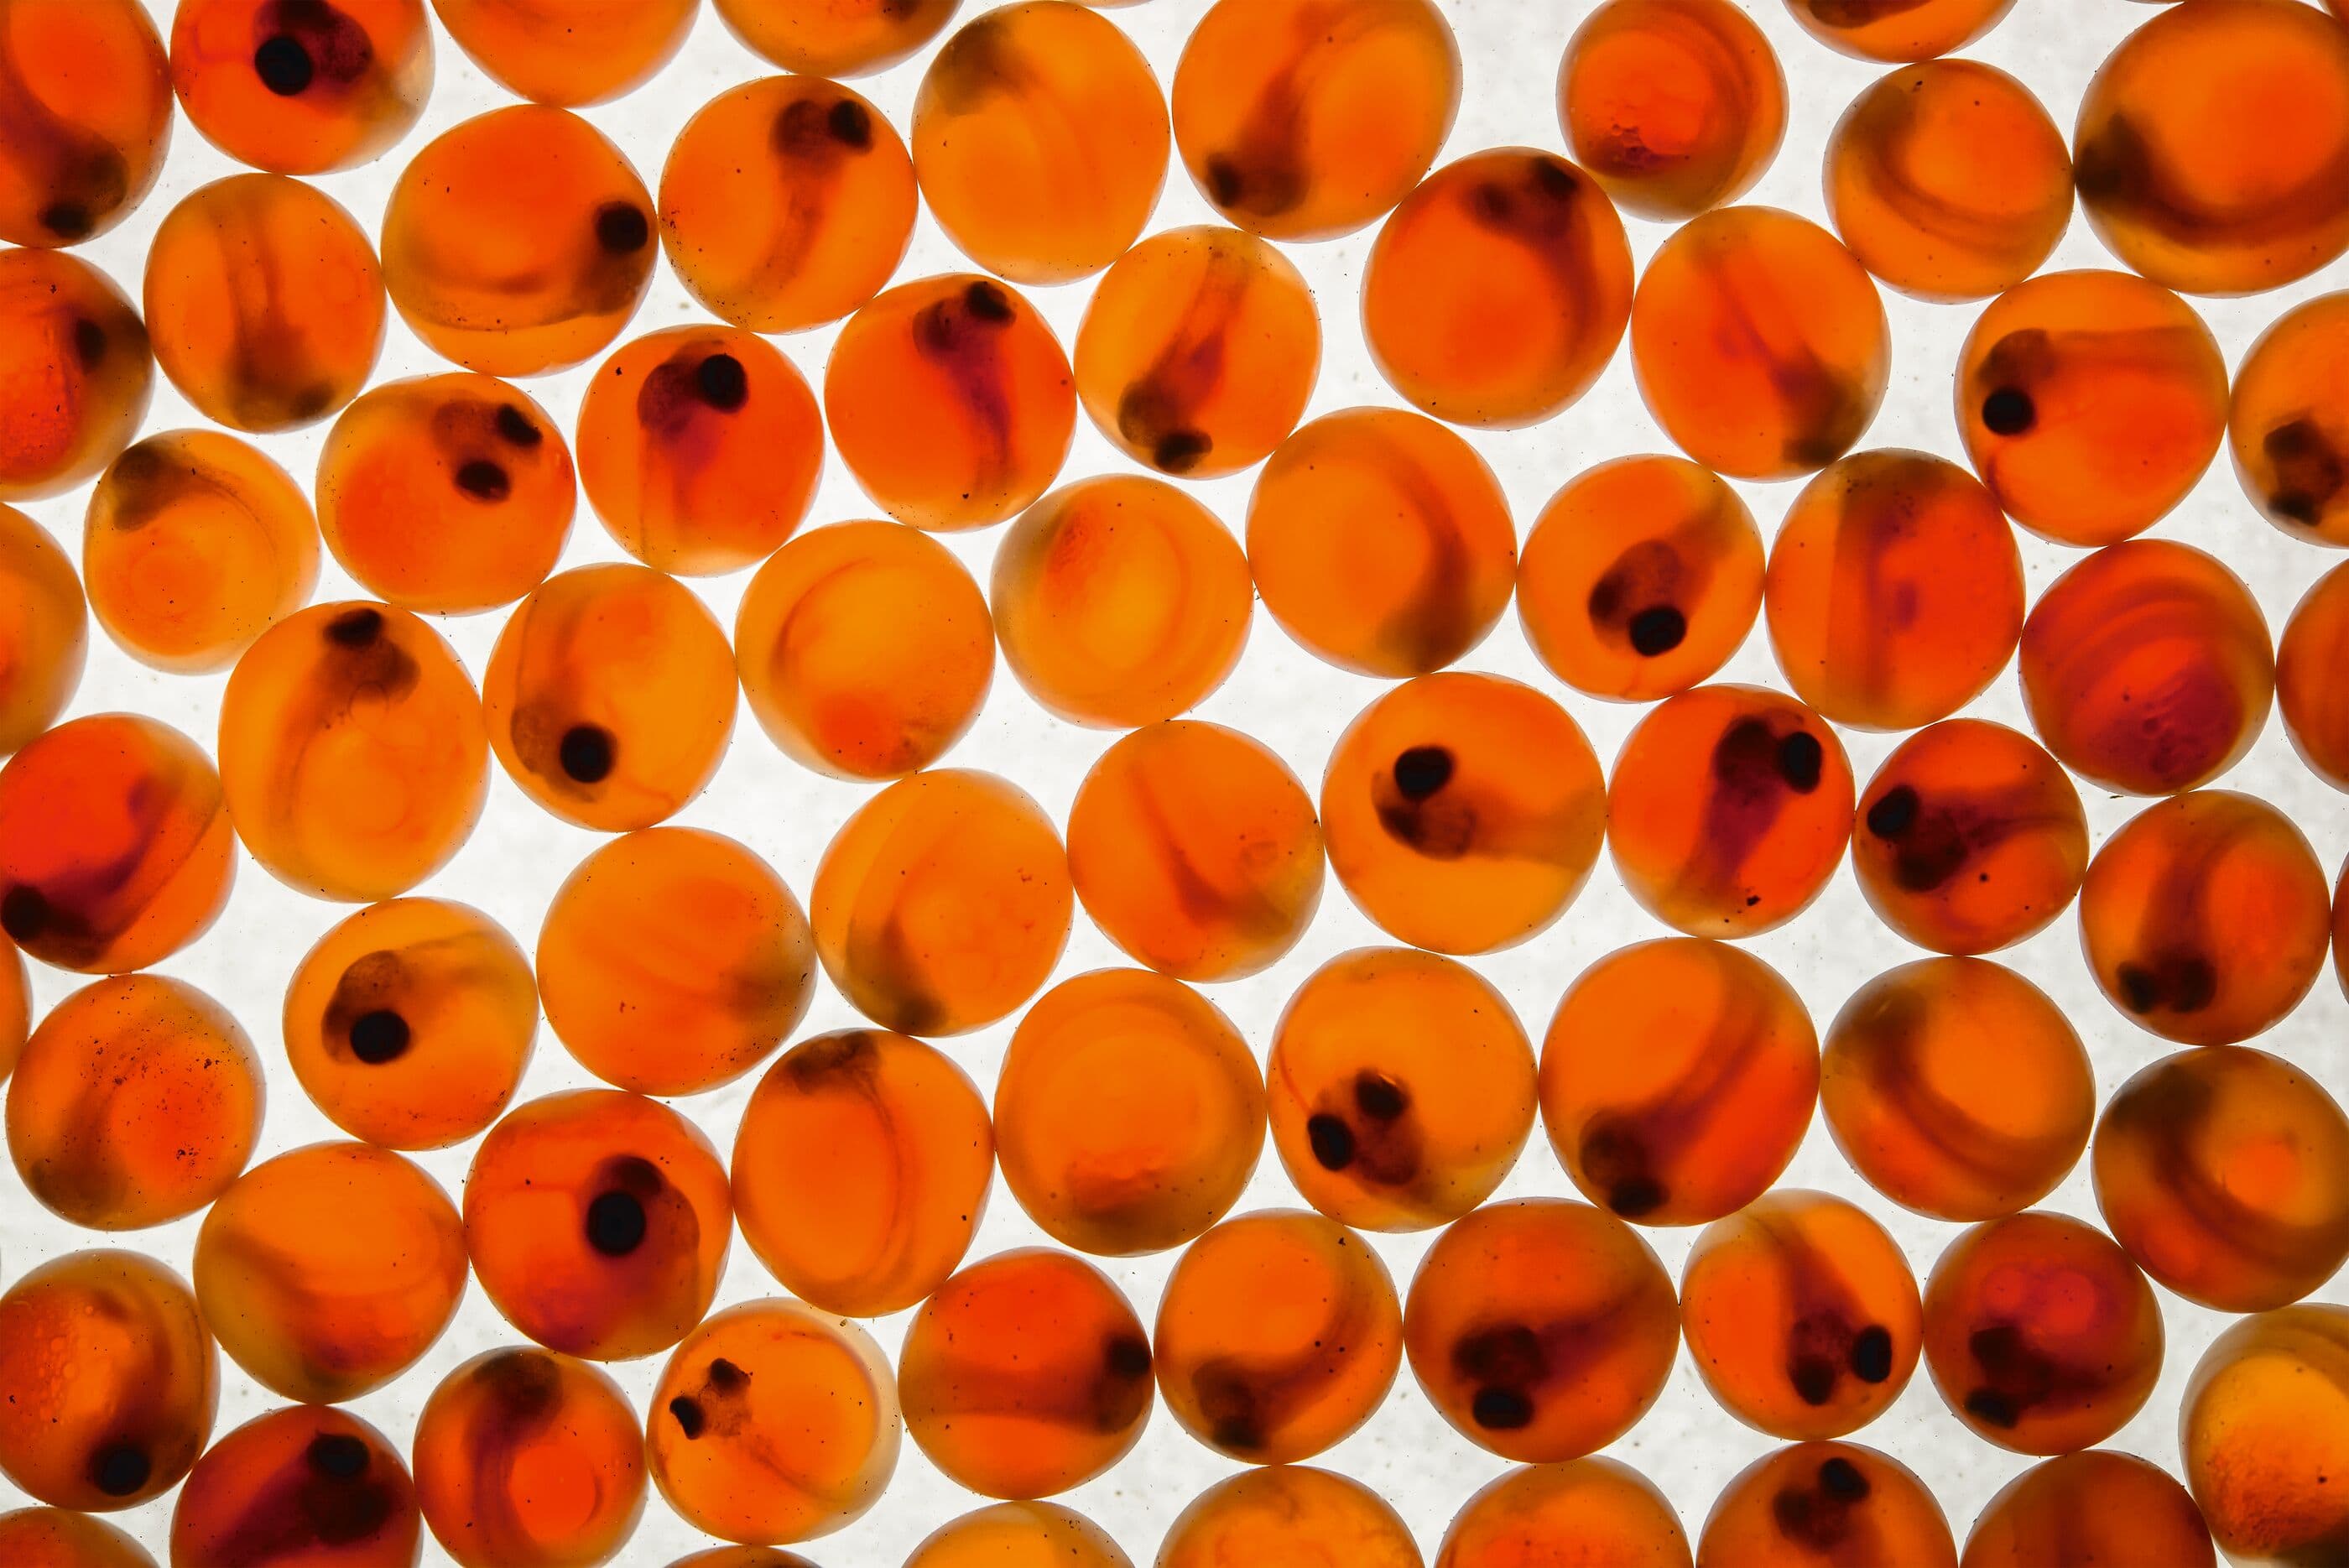 Coho salmon eggs. The black dots are the eyes of the embyros. (Credit: Eiko Jones)